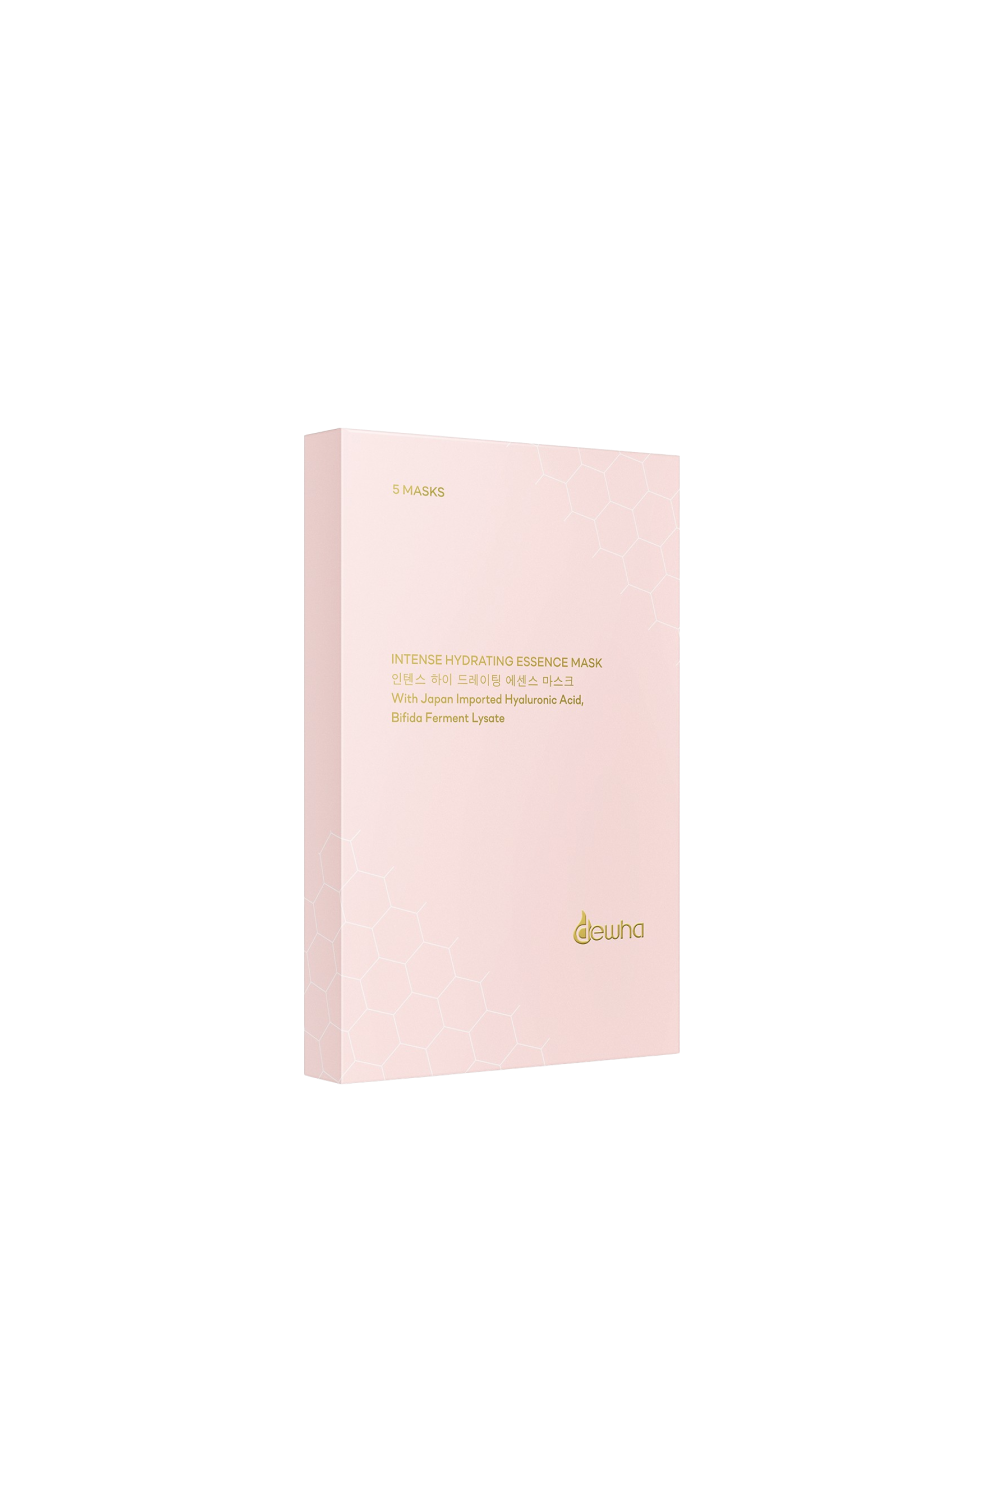 Intense Hydrating Essence Mask (5 sheets) - Dewha